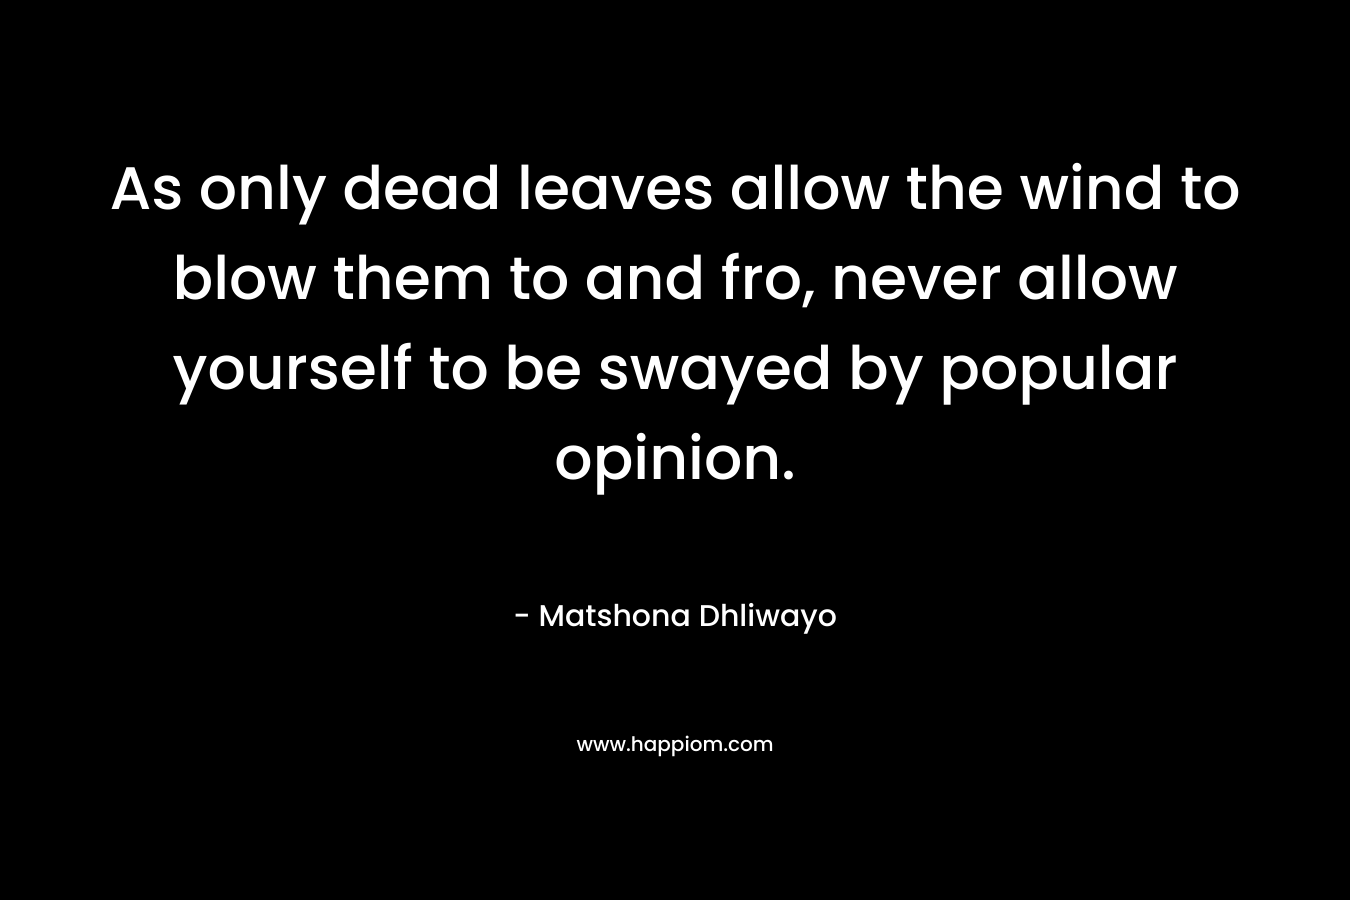 As only dead leaves allow the wind to blow them to and fro, never allow yourself to be swayed by popular opinion. – Matshona Dhliwayo